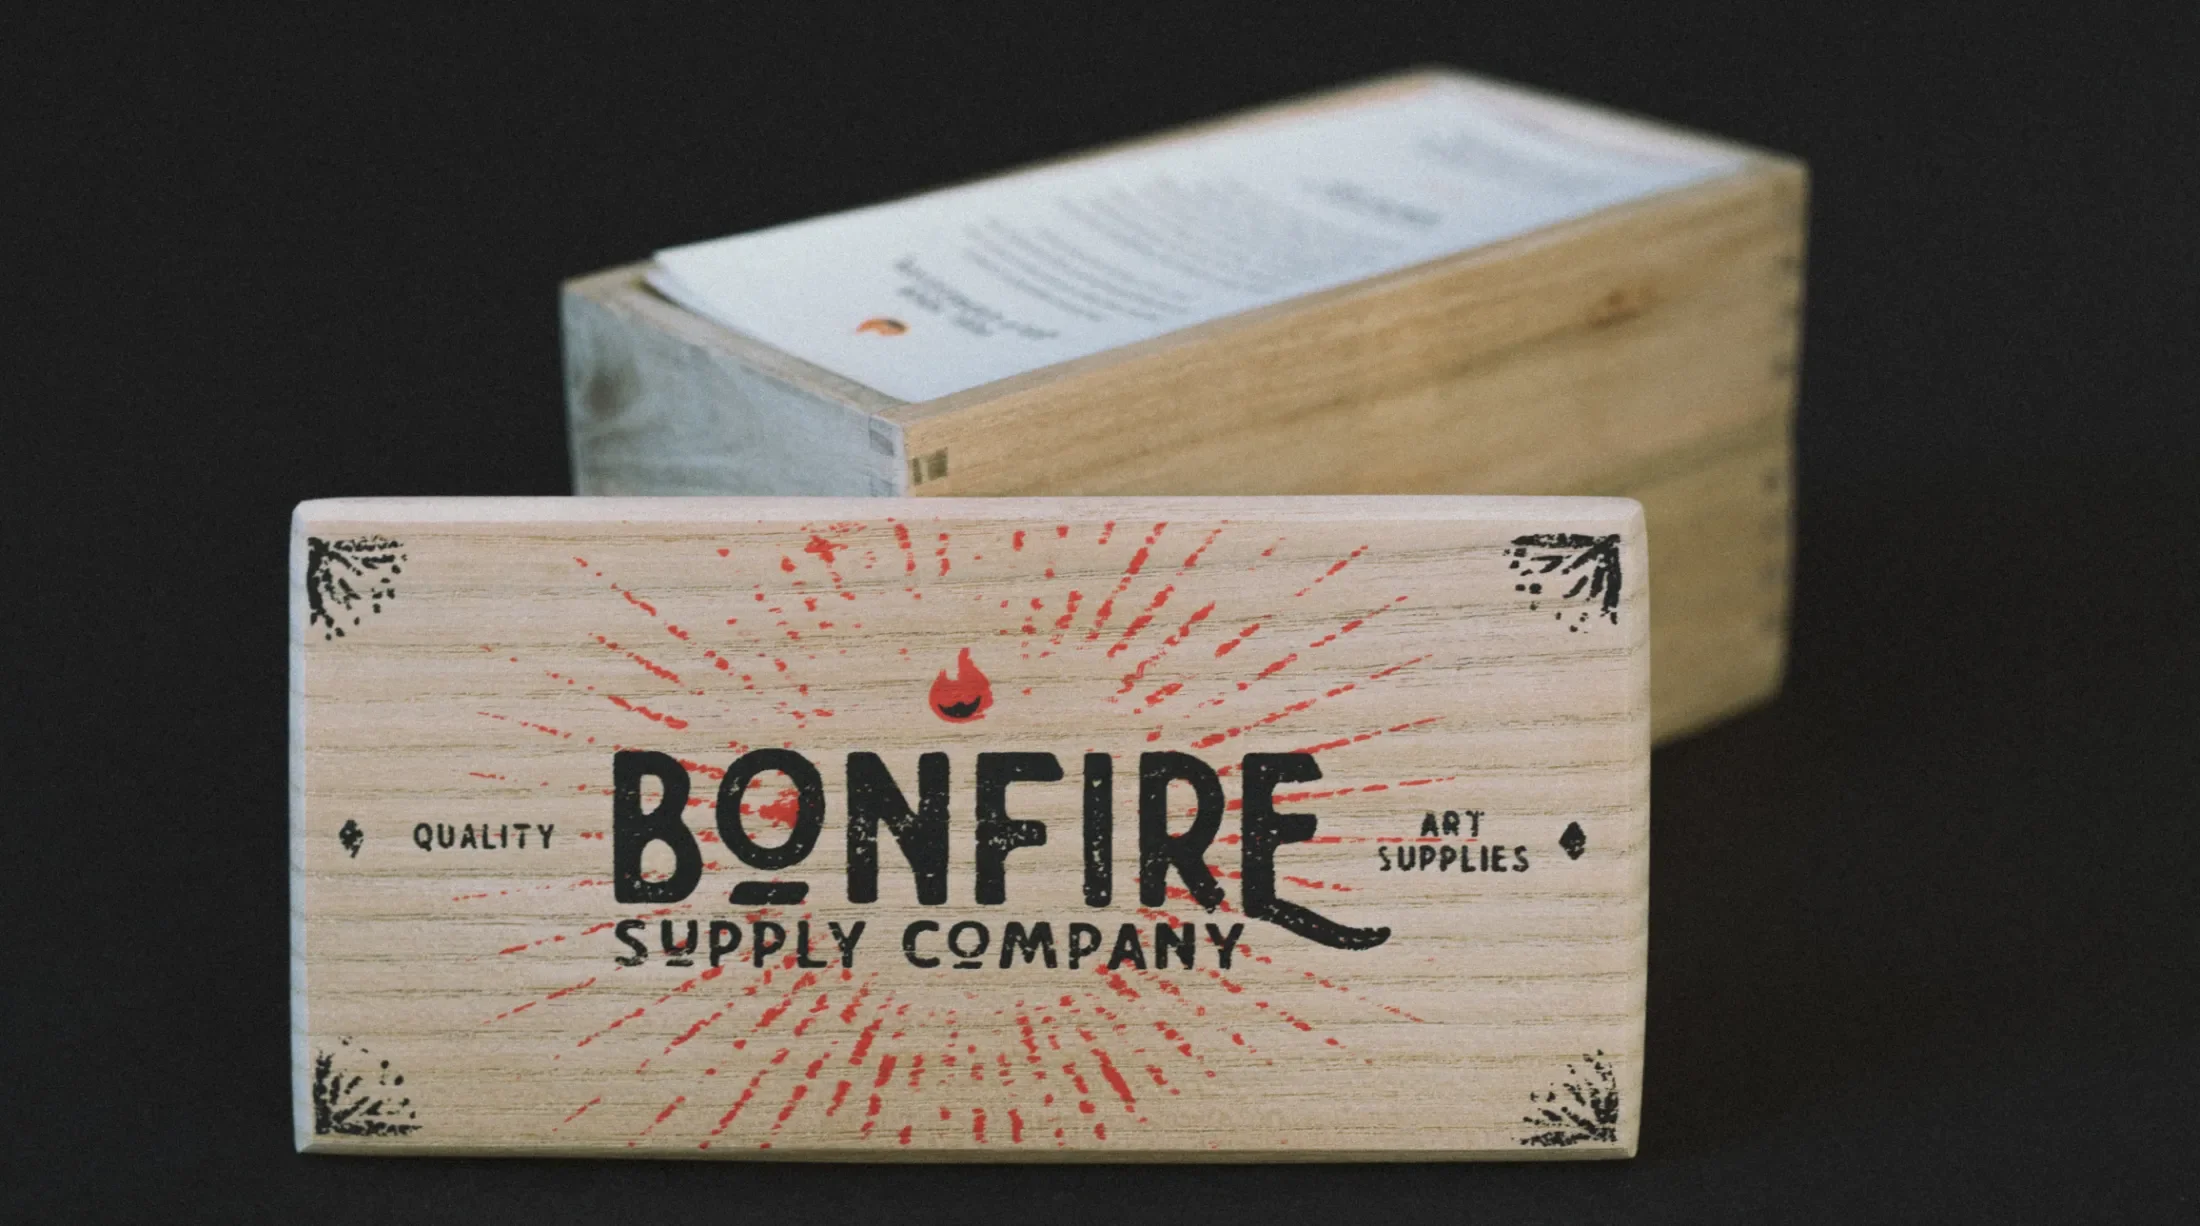 Wooden lid with a Bonfire Supply Company graphic printed on featuring the rest of the bento box in the background